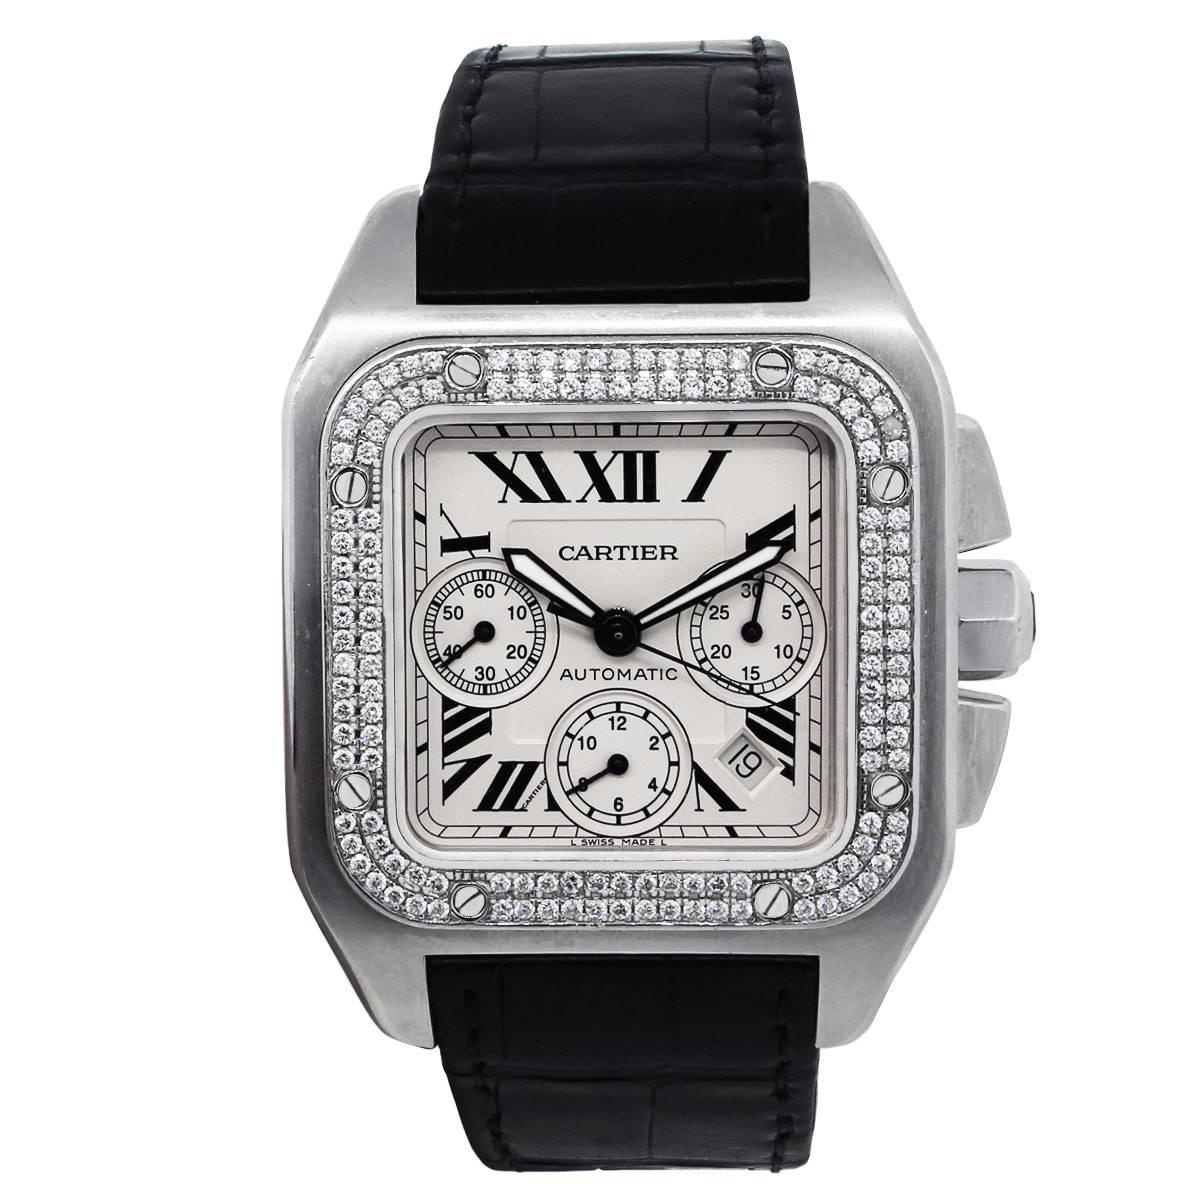 Brand: Cartier
Model: Santos 100 XL
Case Material: Stainless steel
Case Diameter: 42mm
Bezel: Diamond bezel (Aftermarket)
Dial: White chronograph dial. Date is displayed in between 4 o’ clock and 5 o’ clock.
Bracelet: Black leather
Size: Will fit a